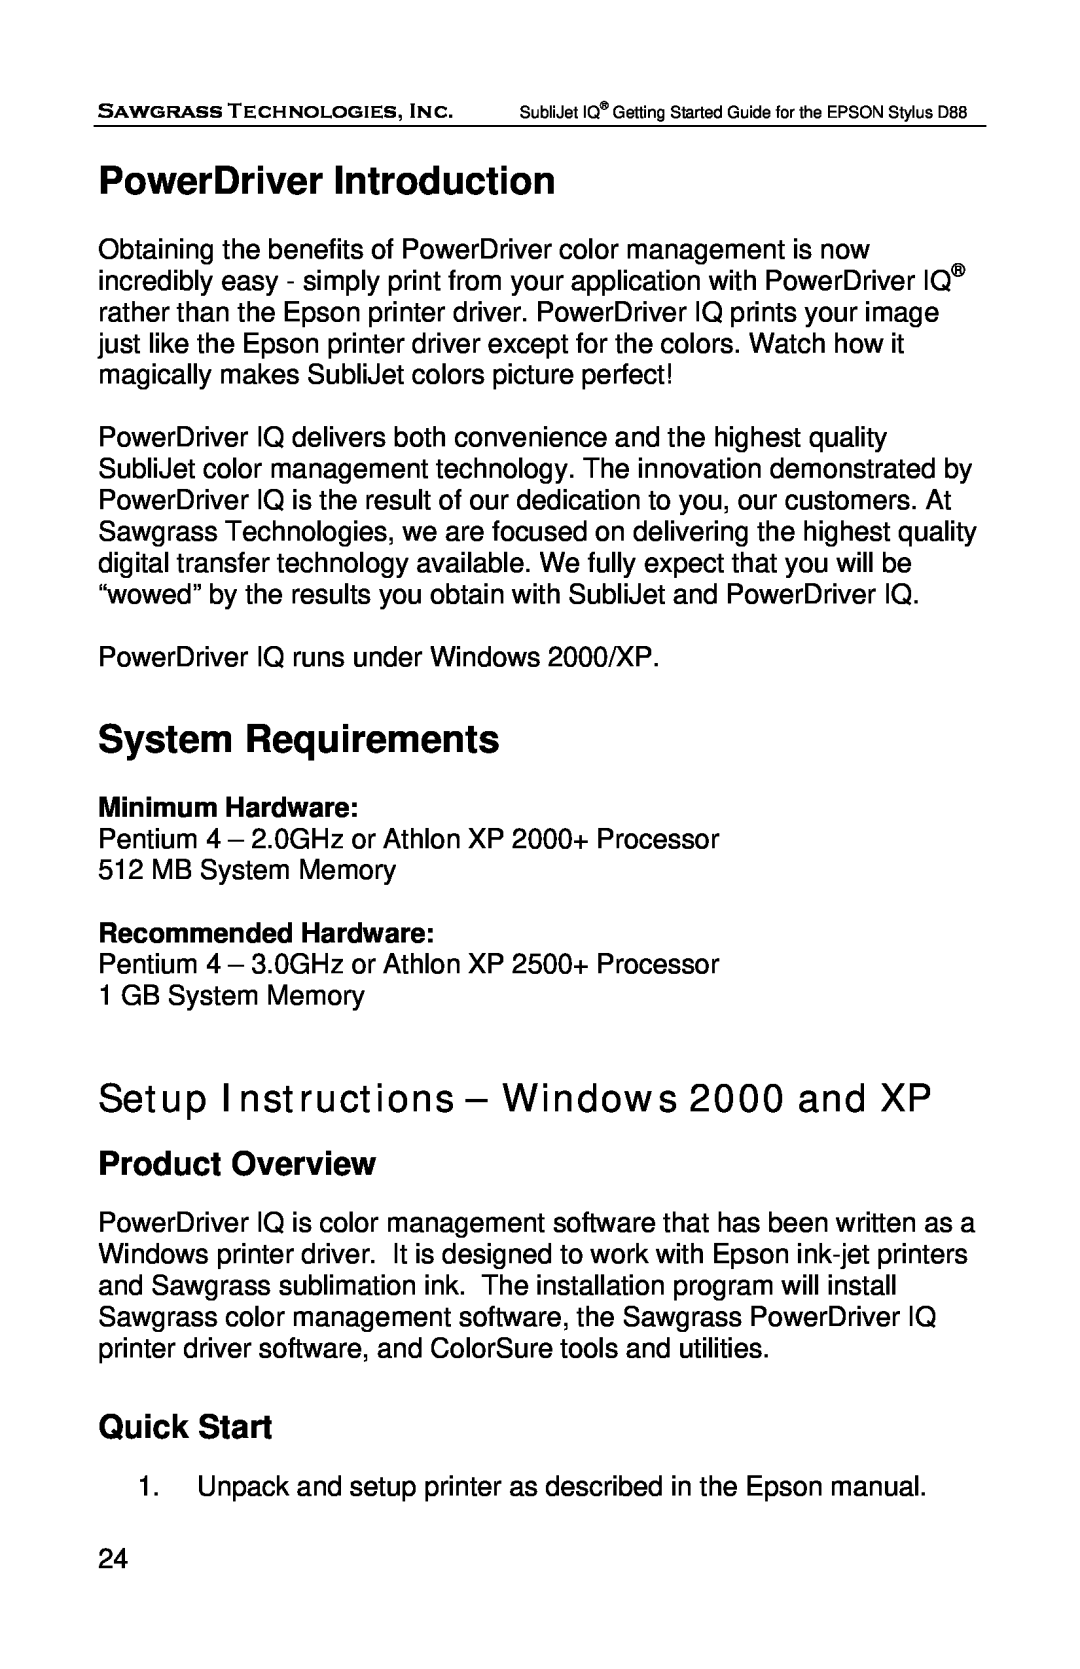 Epson D88 manual PowerDriver Introduction, System Requirements, Setup Instructions - Windows 2000 and XP, Product Overview 